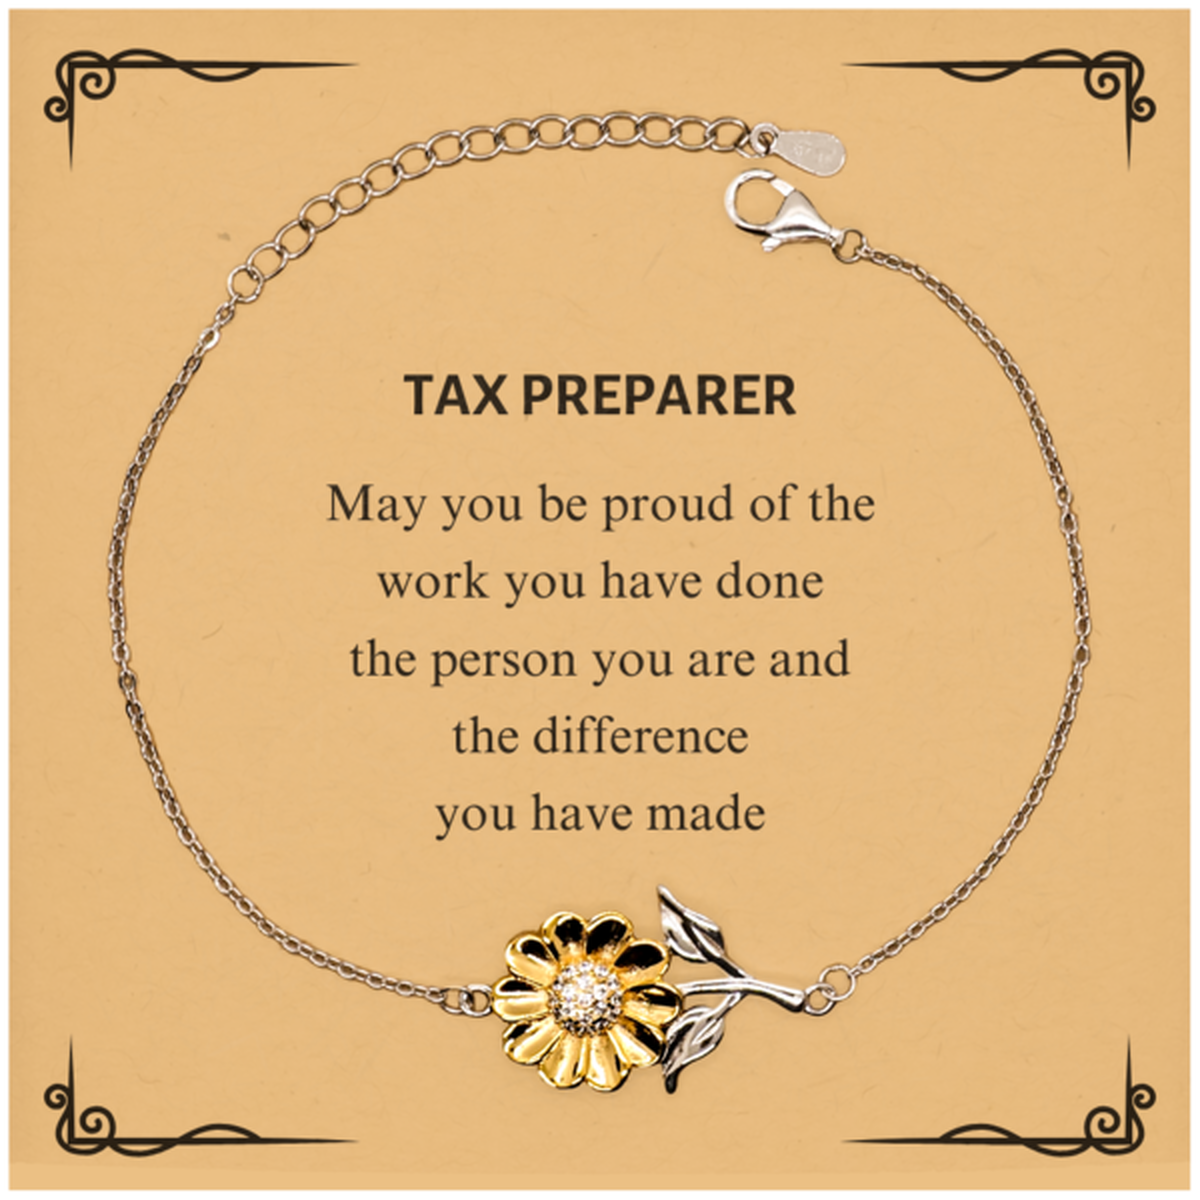 Tax Preparer May you be proud of the work you have done, Retirement Tax Preparer Sunflower Bracelet for Colleague Appreciation Gifts Amazing for Tax Preparer